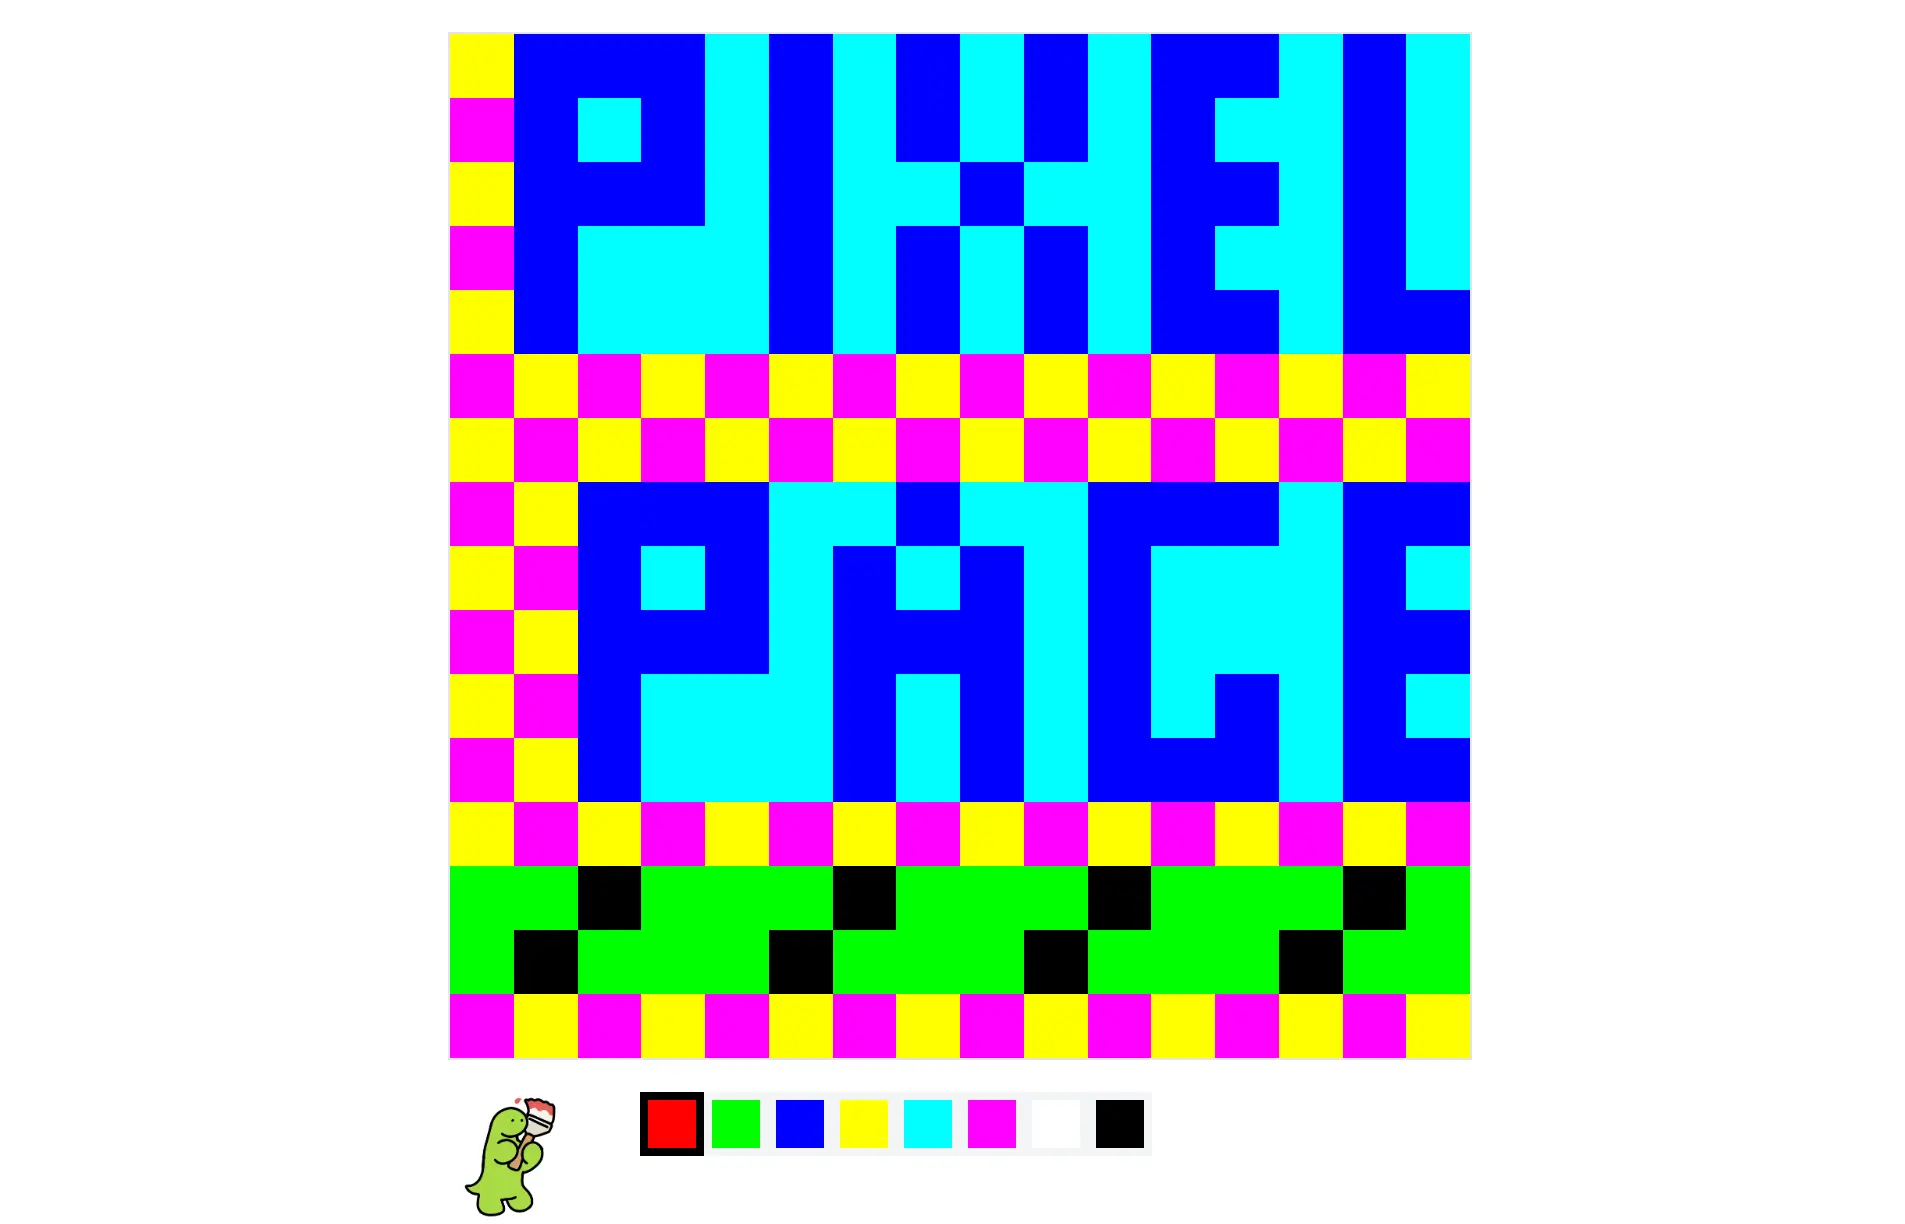 PixelPage, a Deno app where users can paint colorful pixel art.